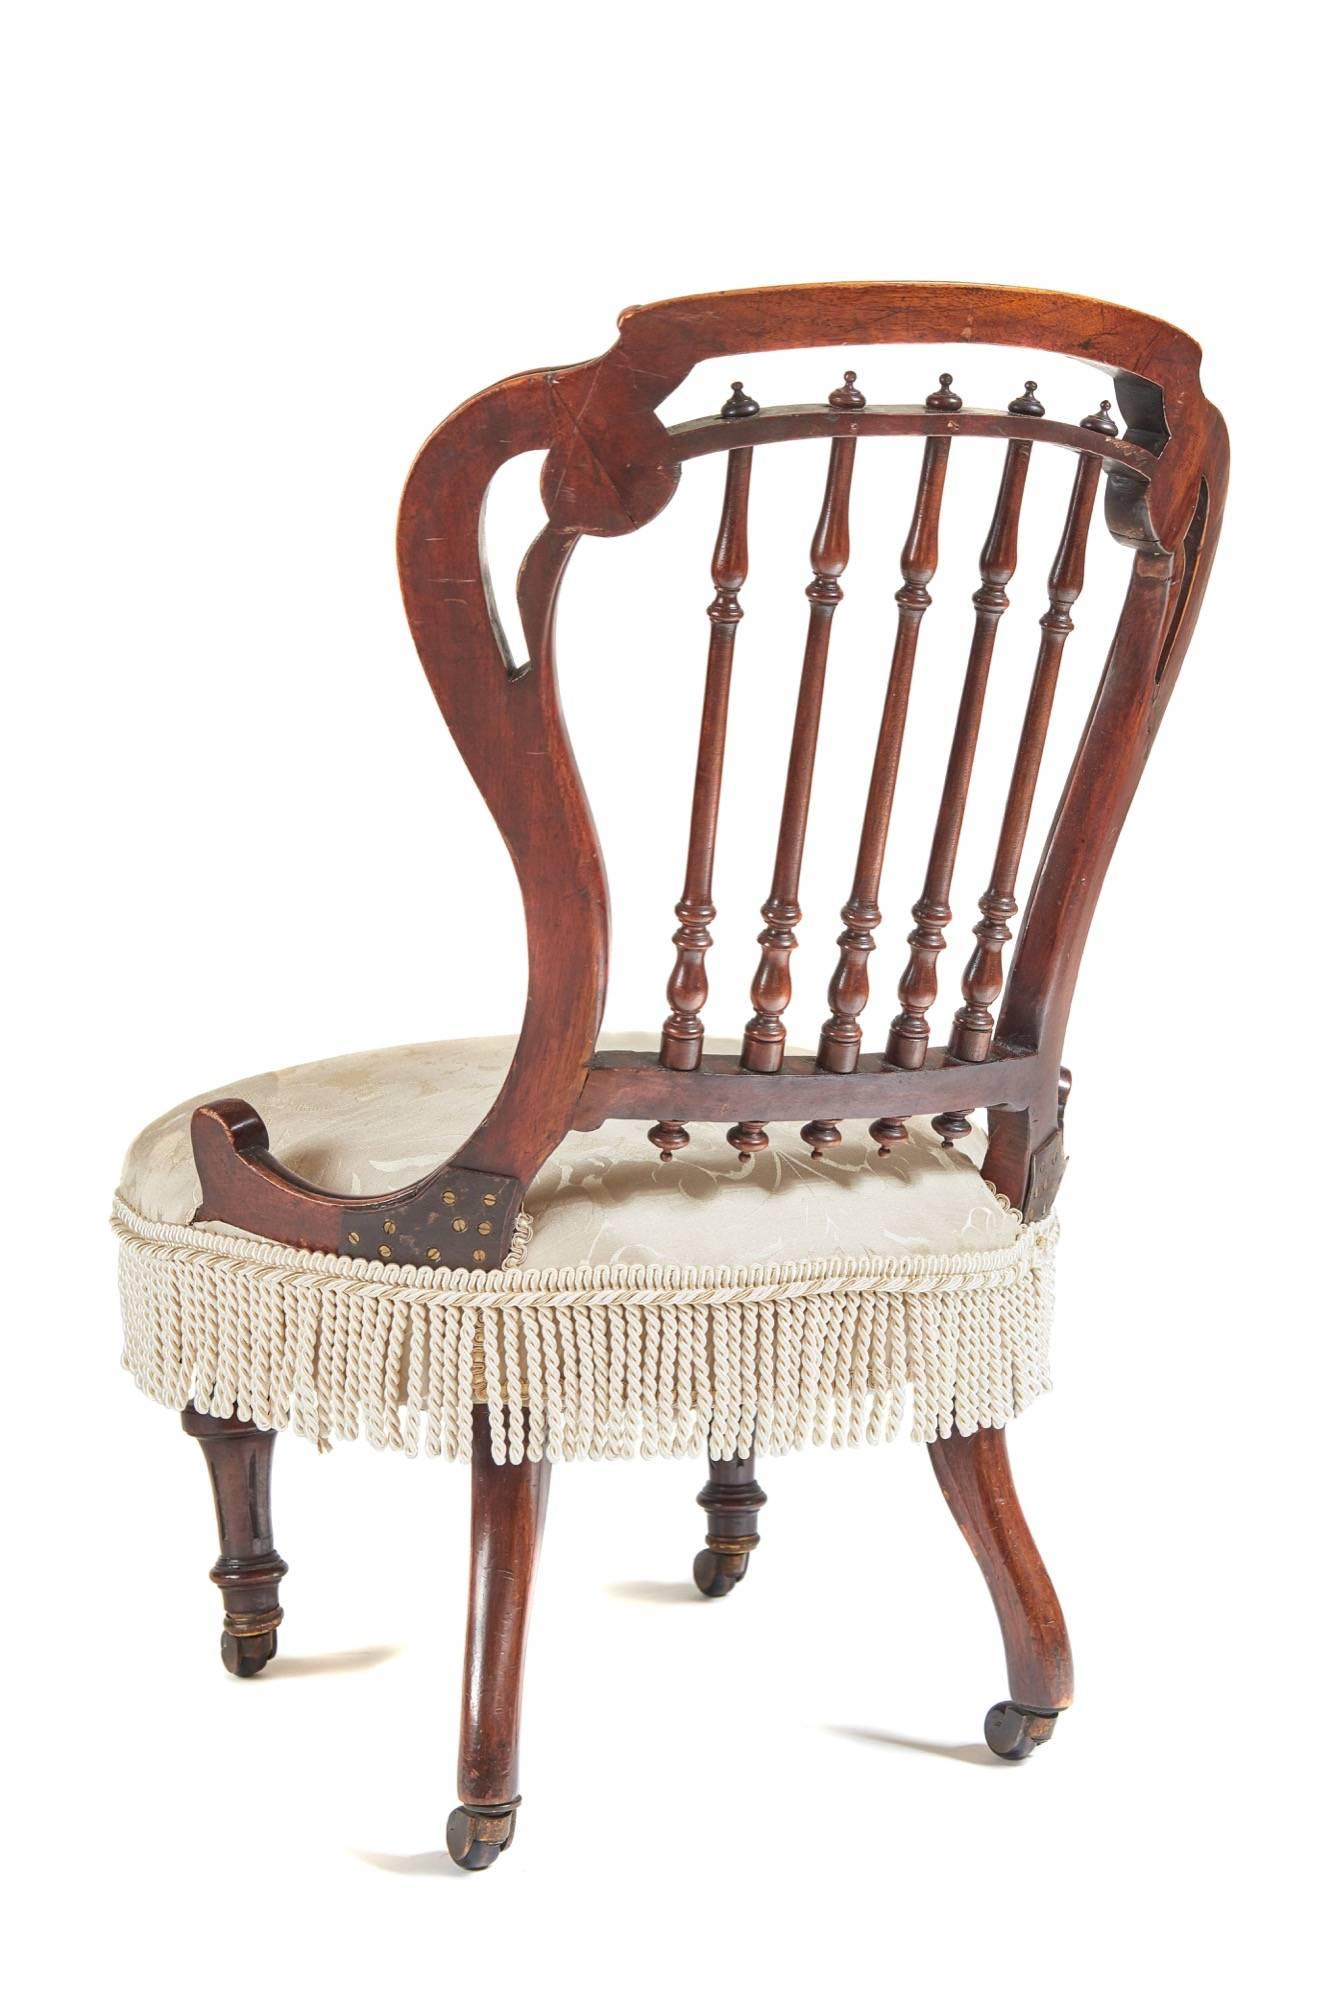 Unusual Victorian walnut nursing chair with carved walnut shaped frame turned carved spindles to the back, newly re-upholstered seat, supported by turned fluted front legs outswept back legs, original ceramic castors.

Measures: Height: